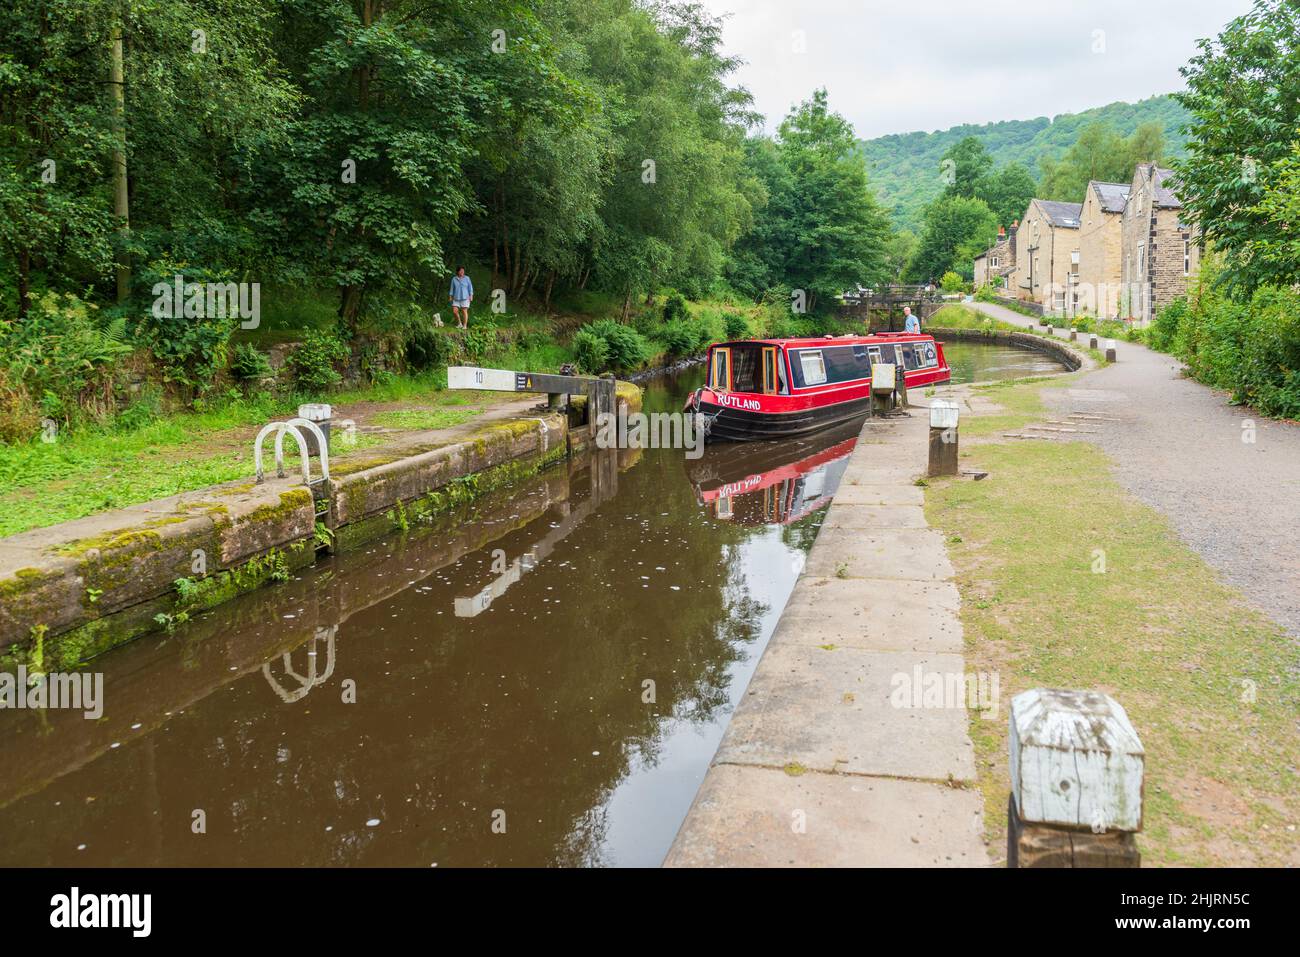 A narrow boat entering the chamber of one of the locks on the Rochdale Canal at Hebden Bridge Stock Photo